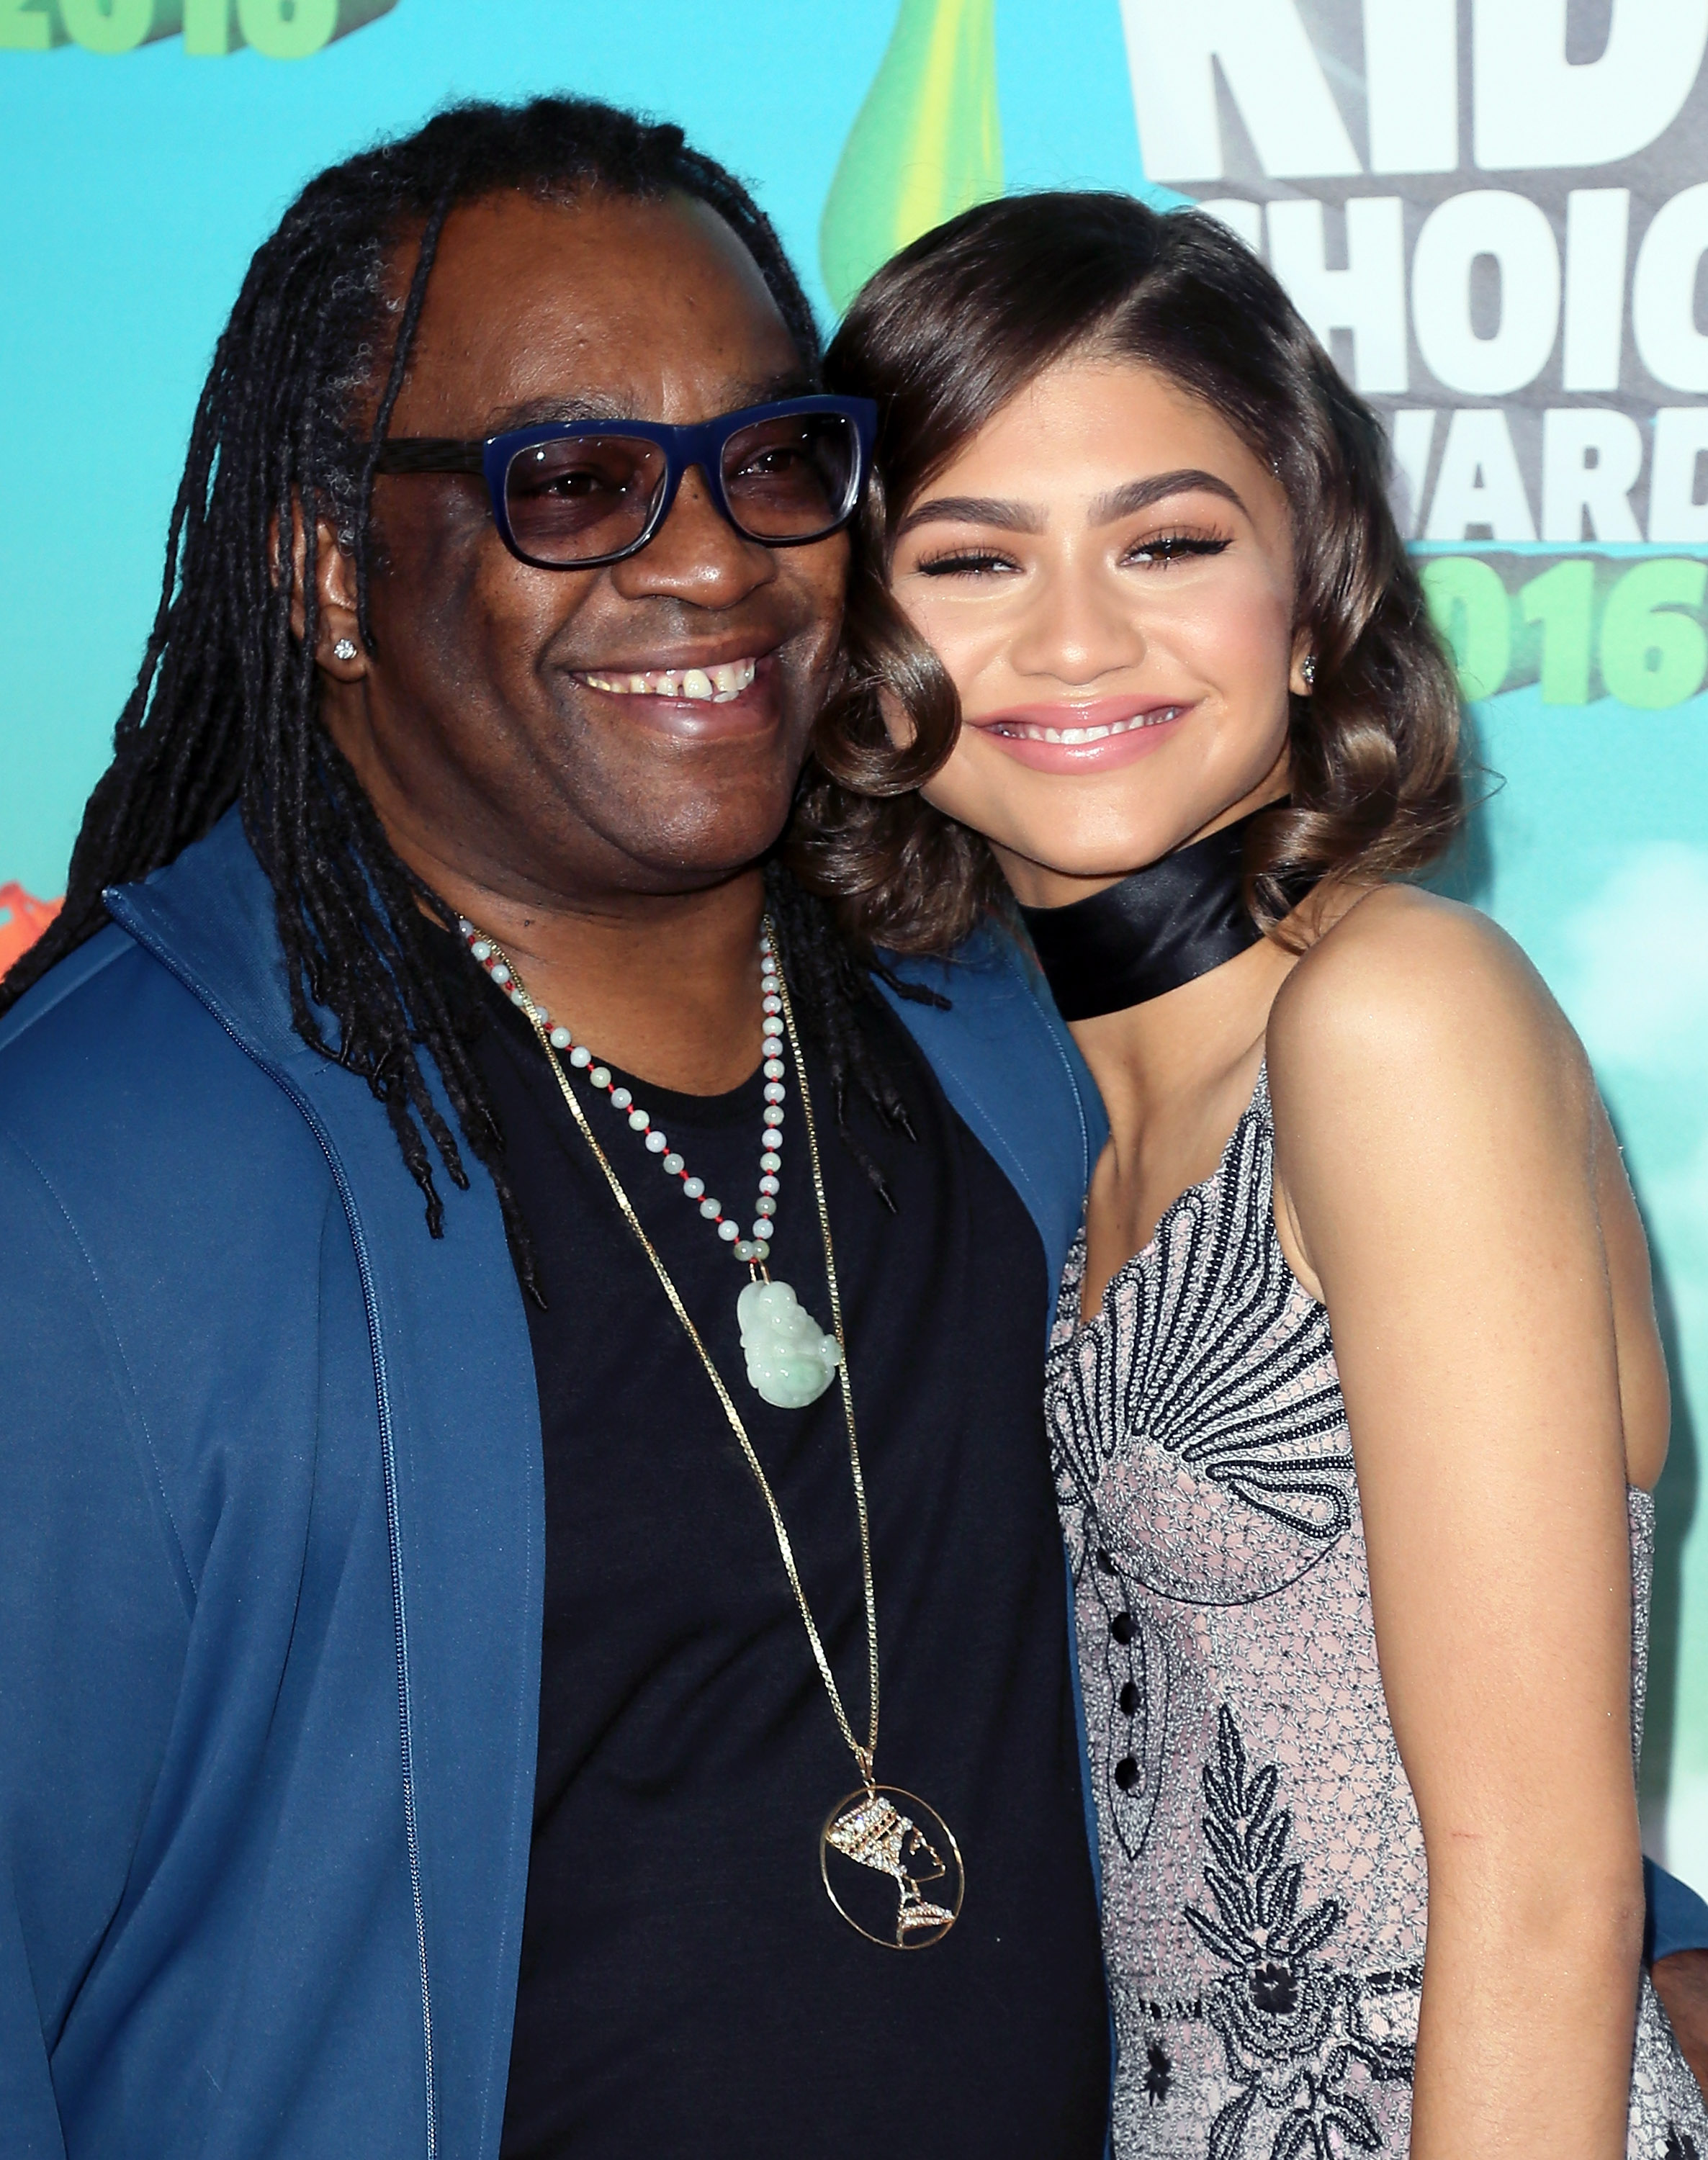 Zendaya and Kazembe Ajamu Coleman attend Nickelodeon's Kids' Choice Awards at The Forum in Inglewood, California, on March 12, 2016. | Source: Getty Images